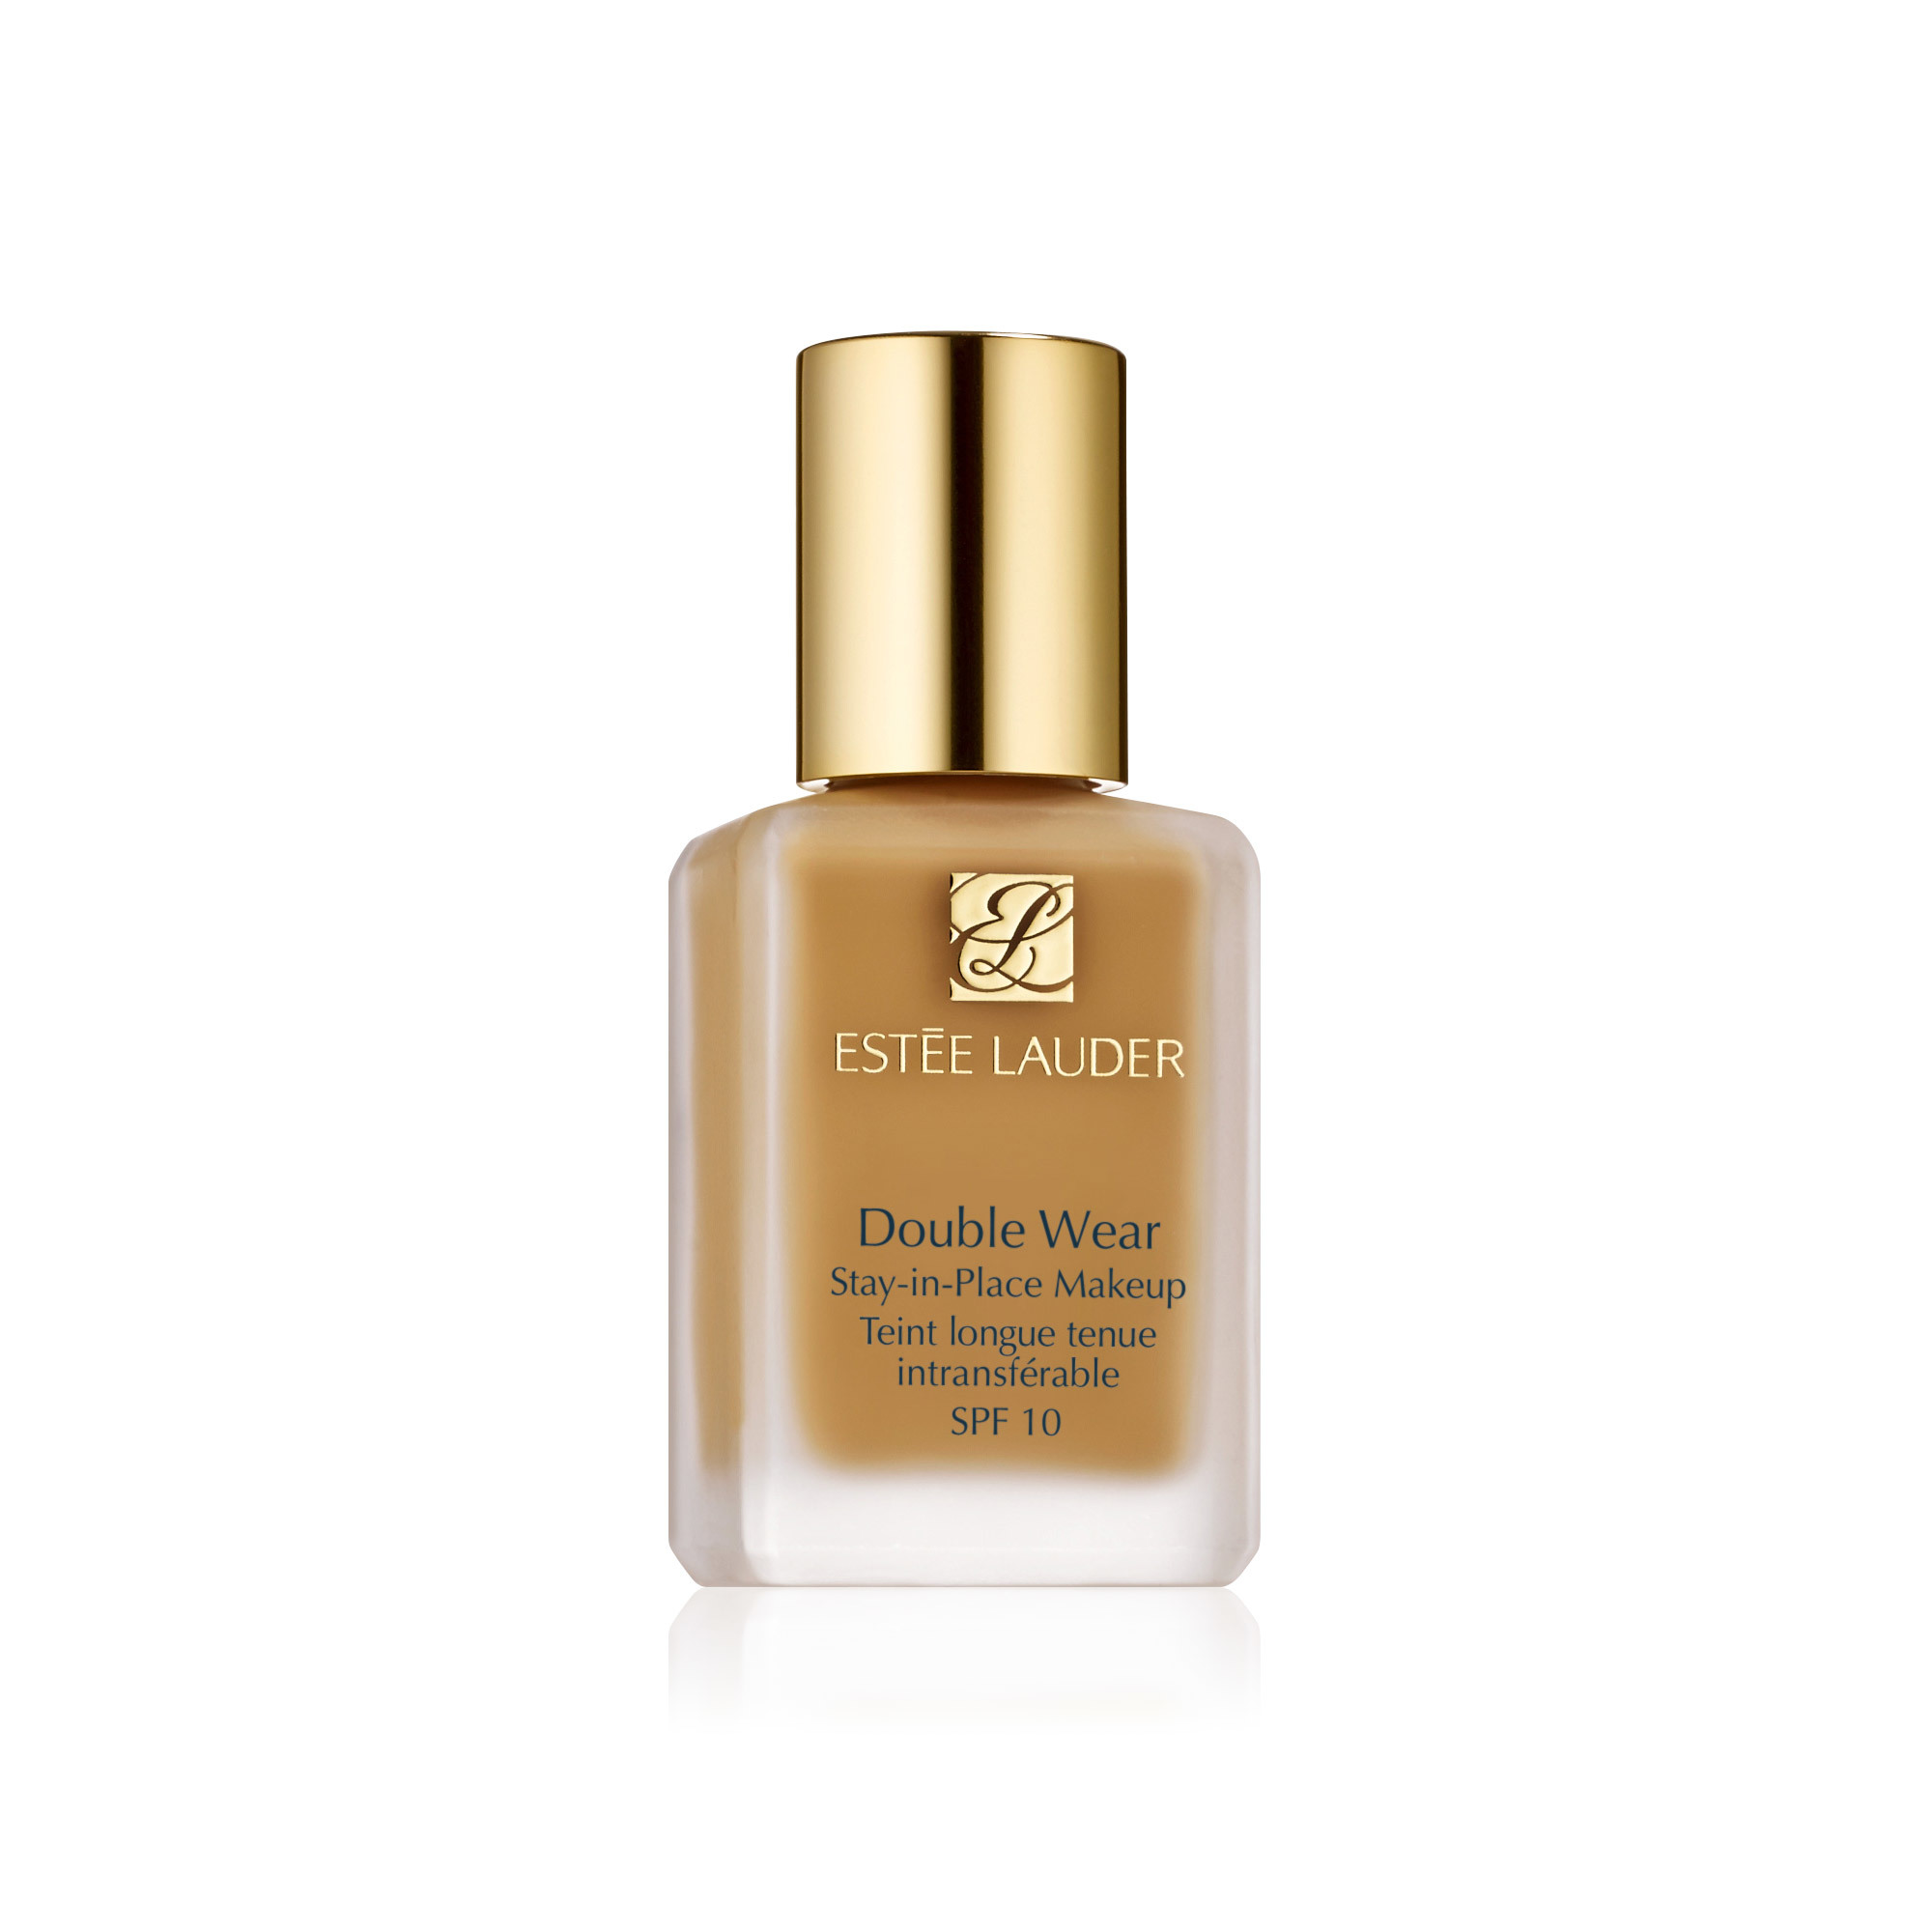 Double Wear Stay-In-Place Makeup Foundation